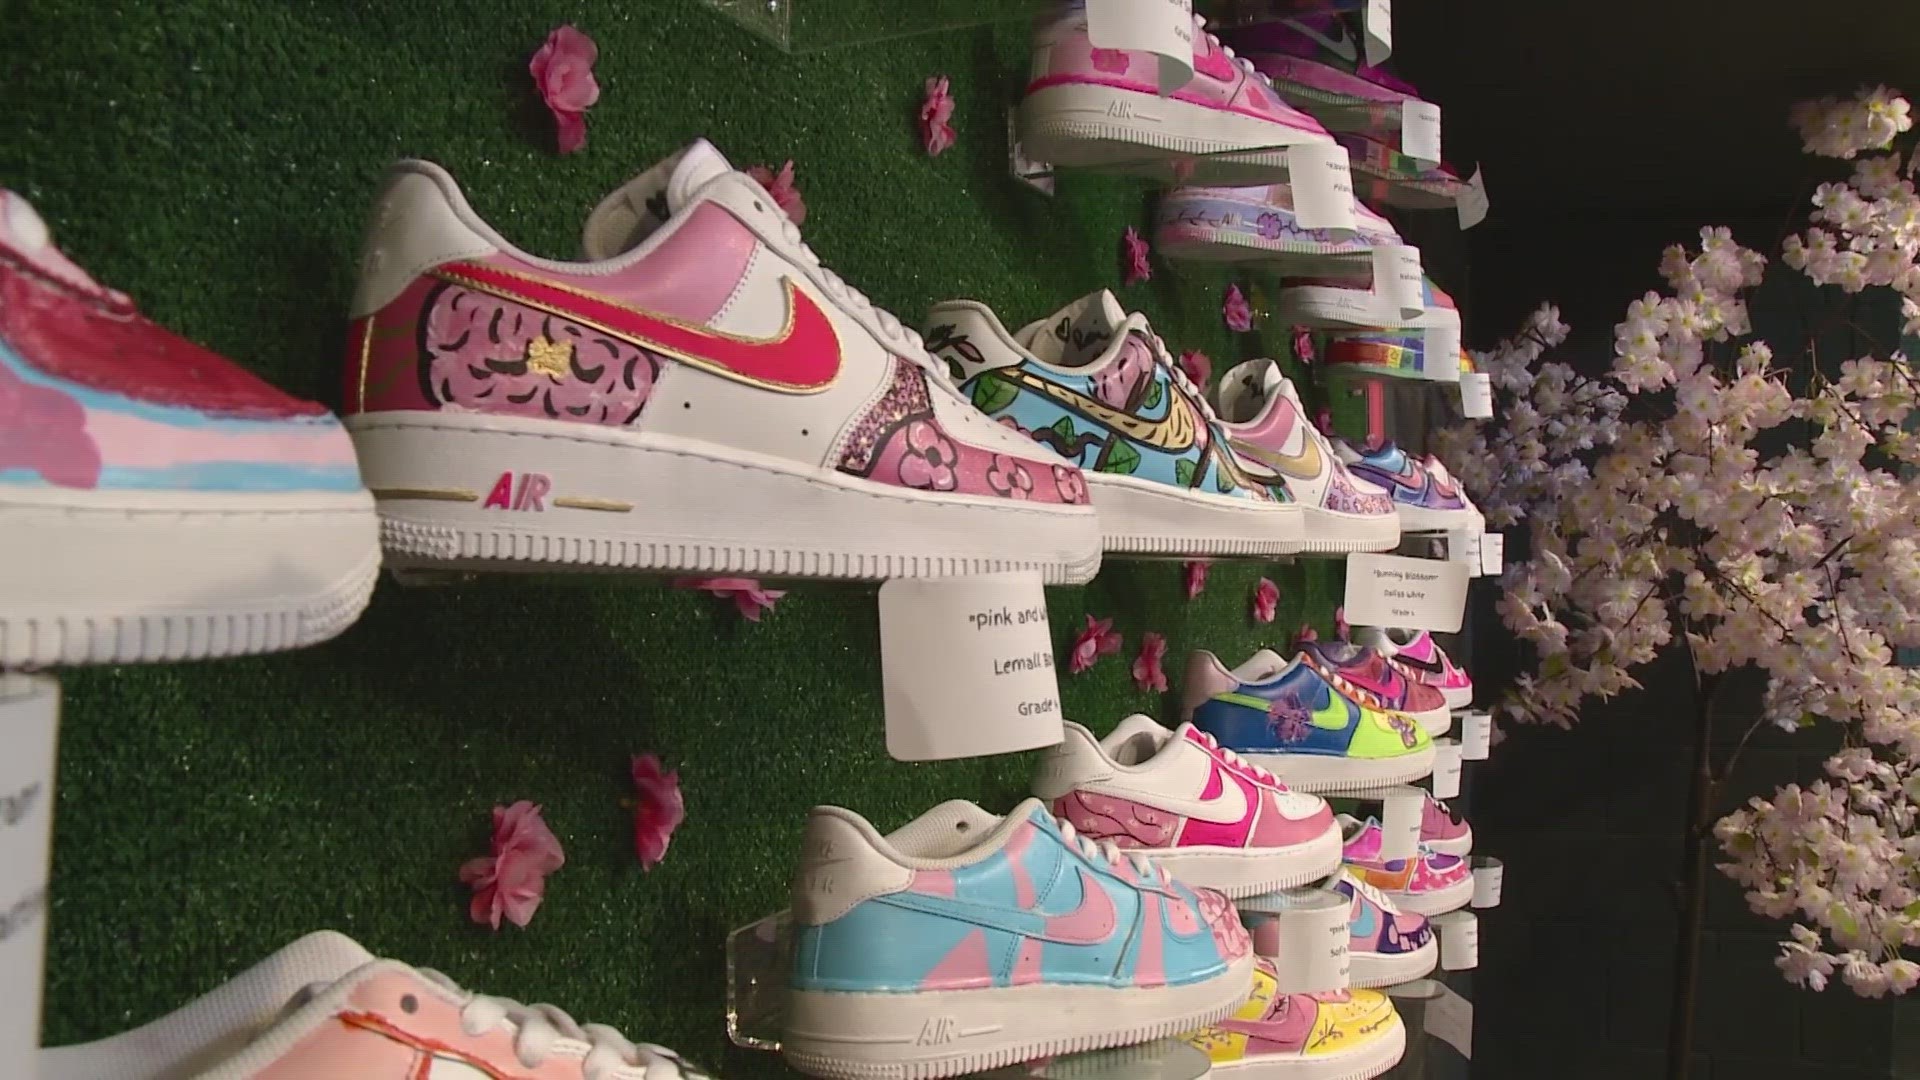 As part of the National Cherry Blossom Festival, students were asked to take donated sneakers and create their own custom designs. The theme: Let's Spring Together.